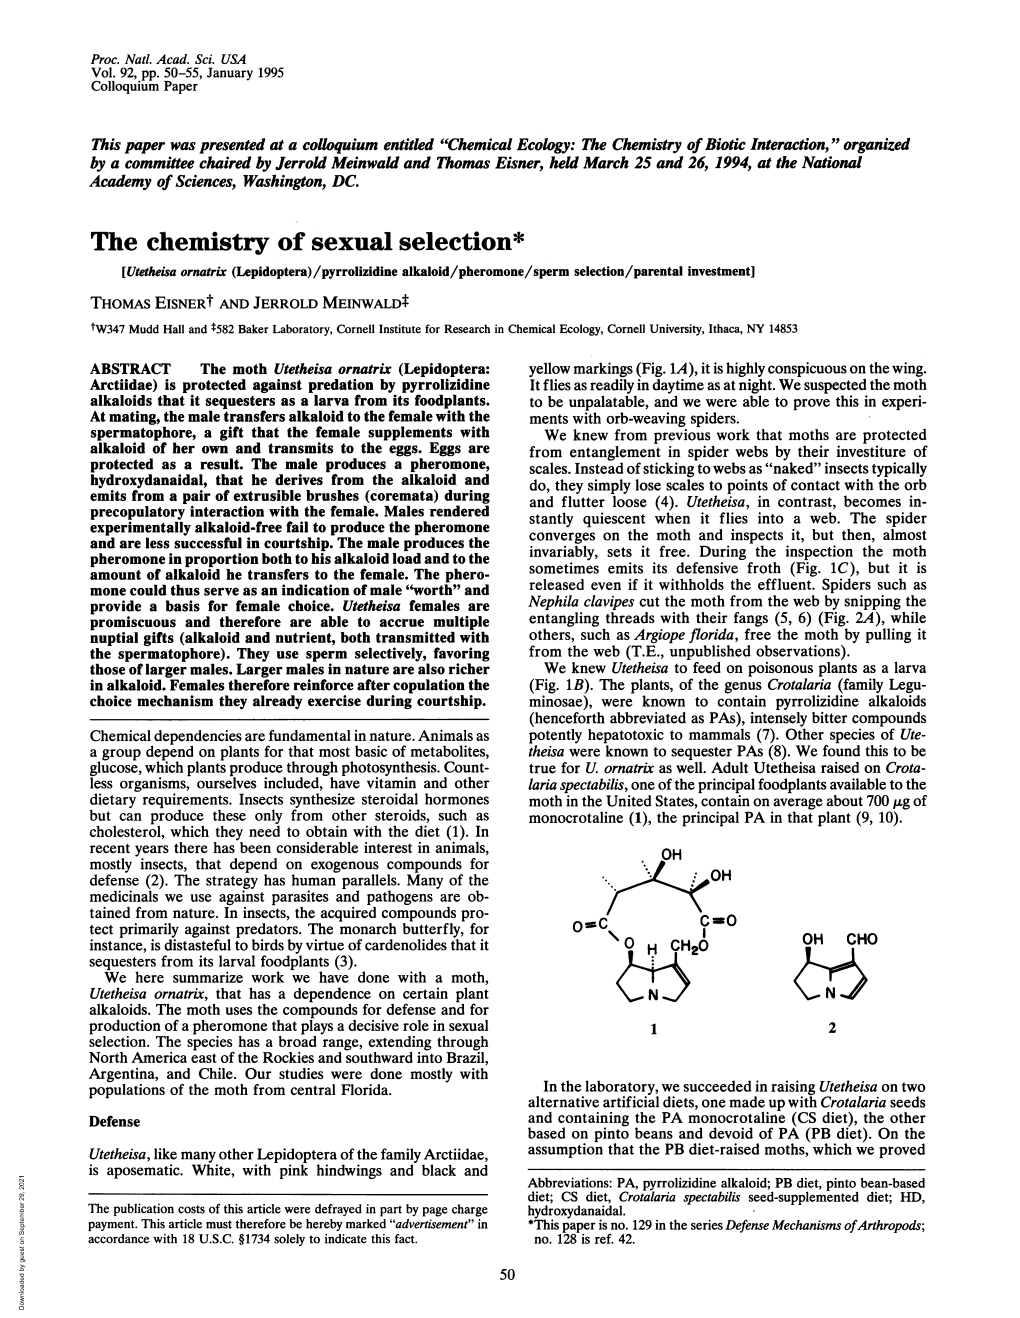 The Chemistry of Sexual Selection*